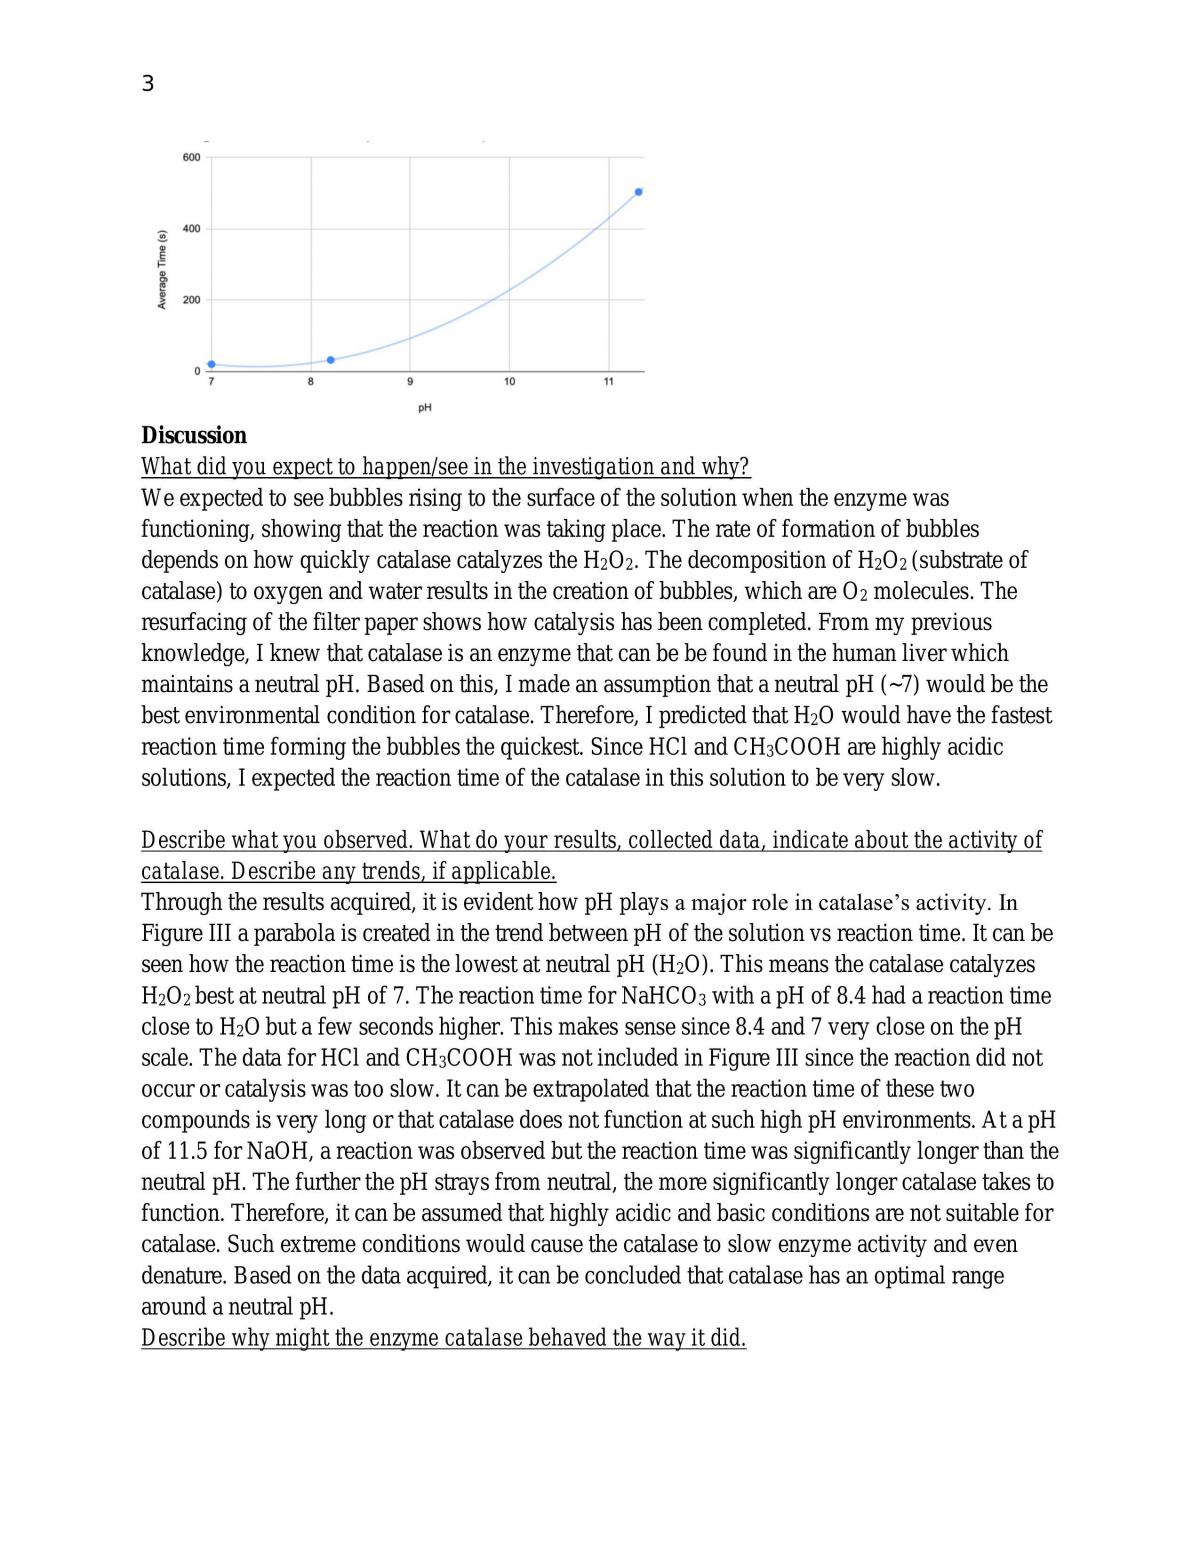 Impact of pH on Catalase’s Function in Catalysis of Hydrogen Peroxide - Page 3